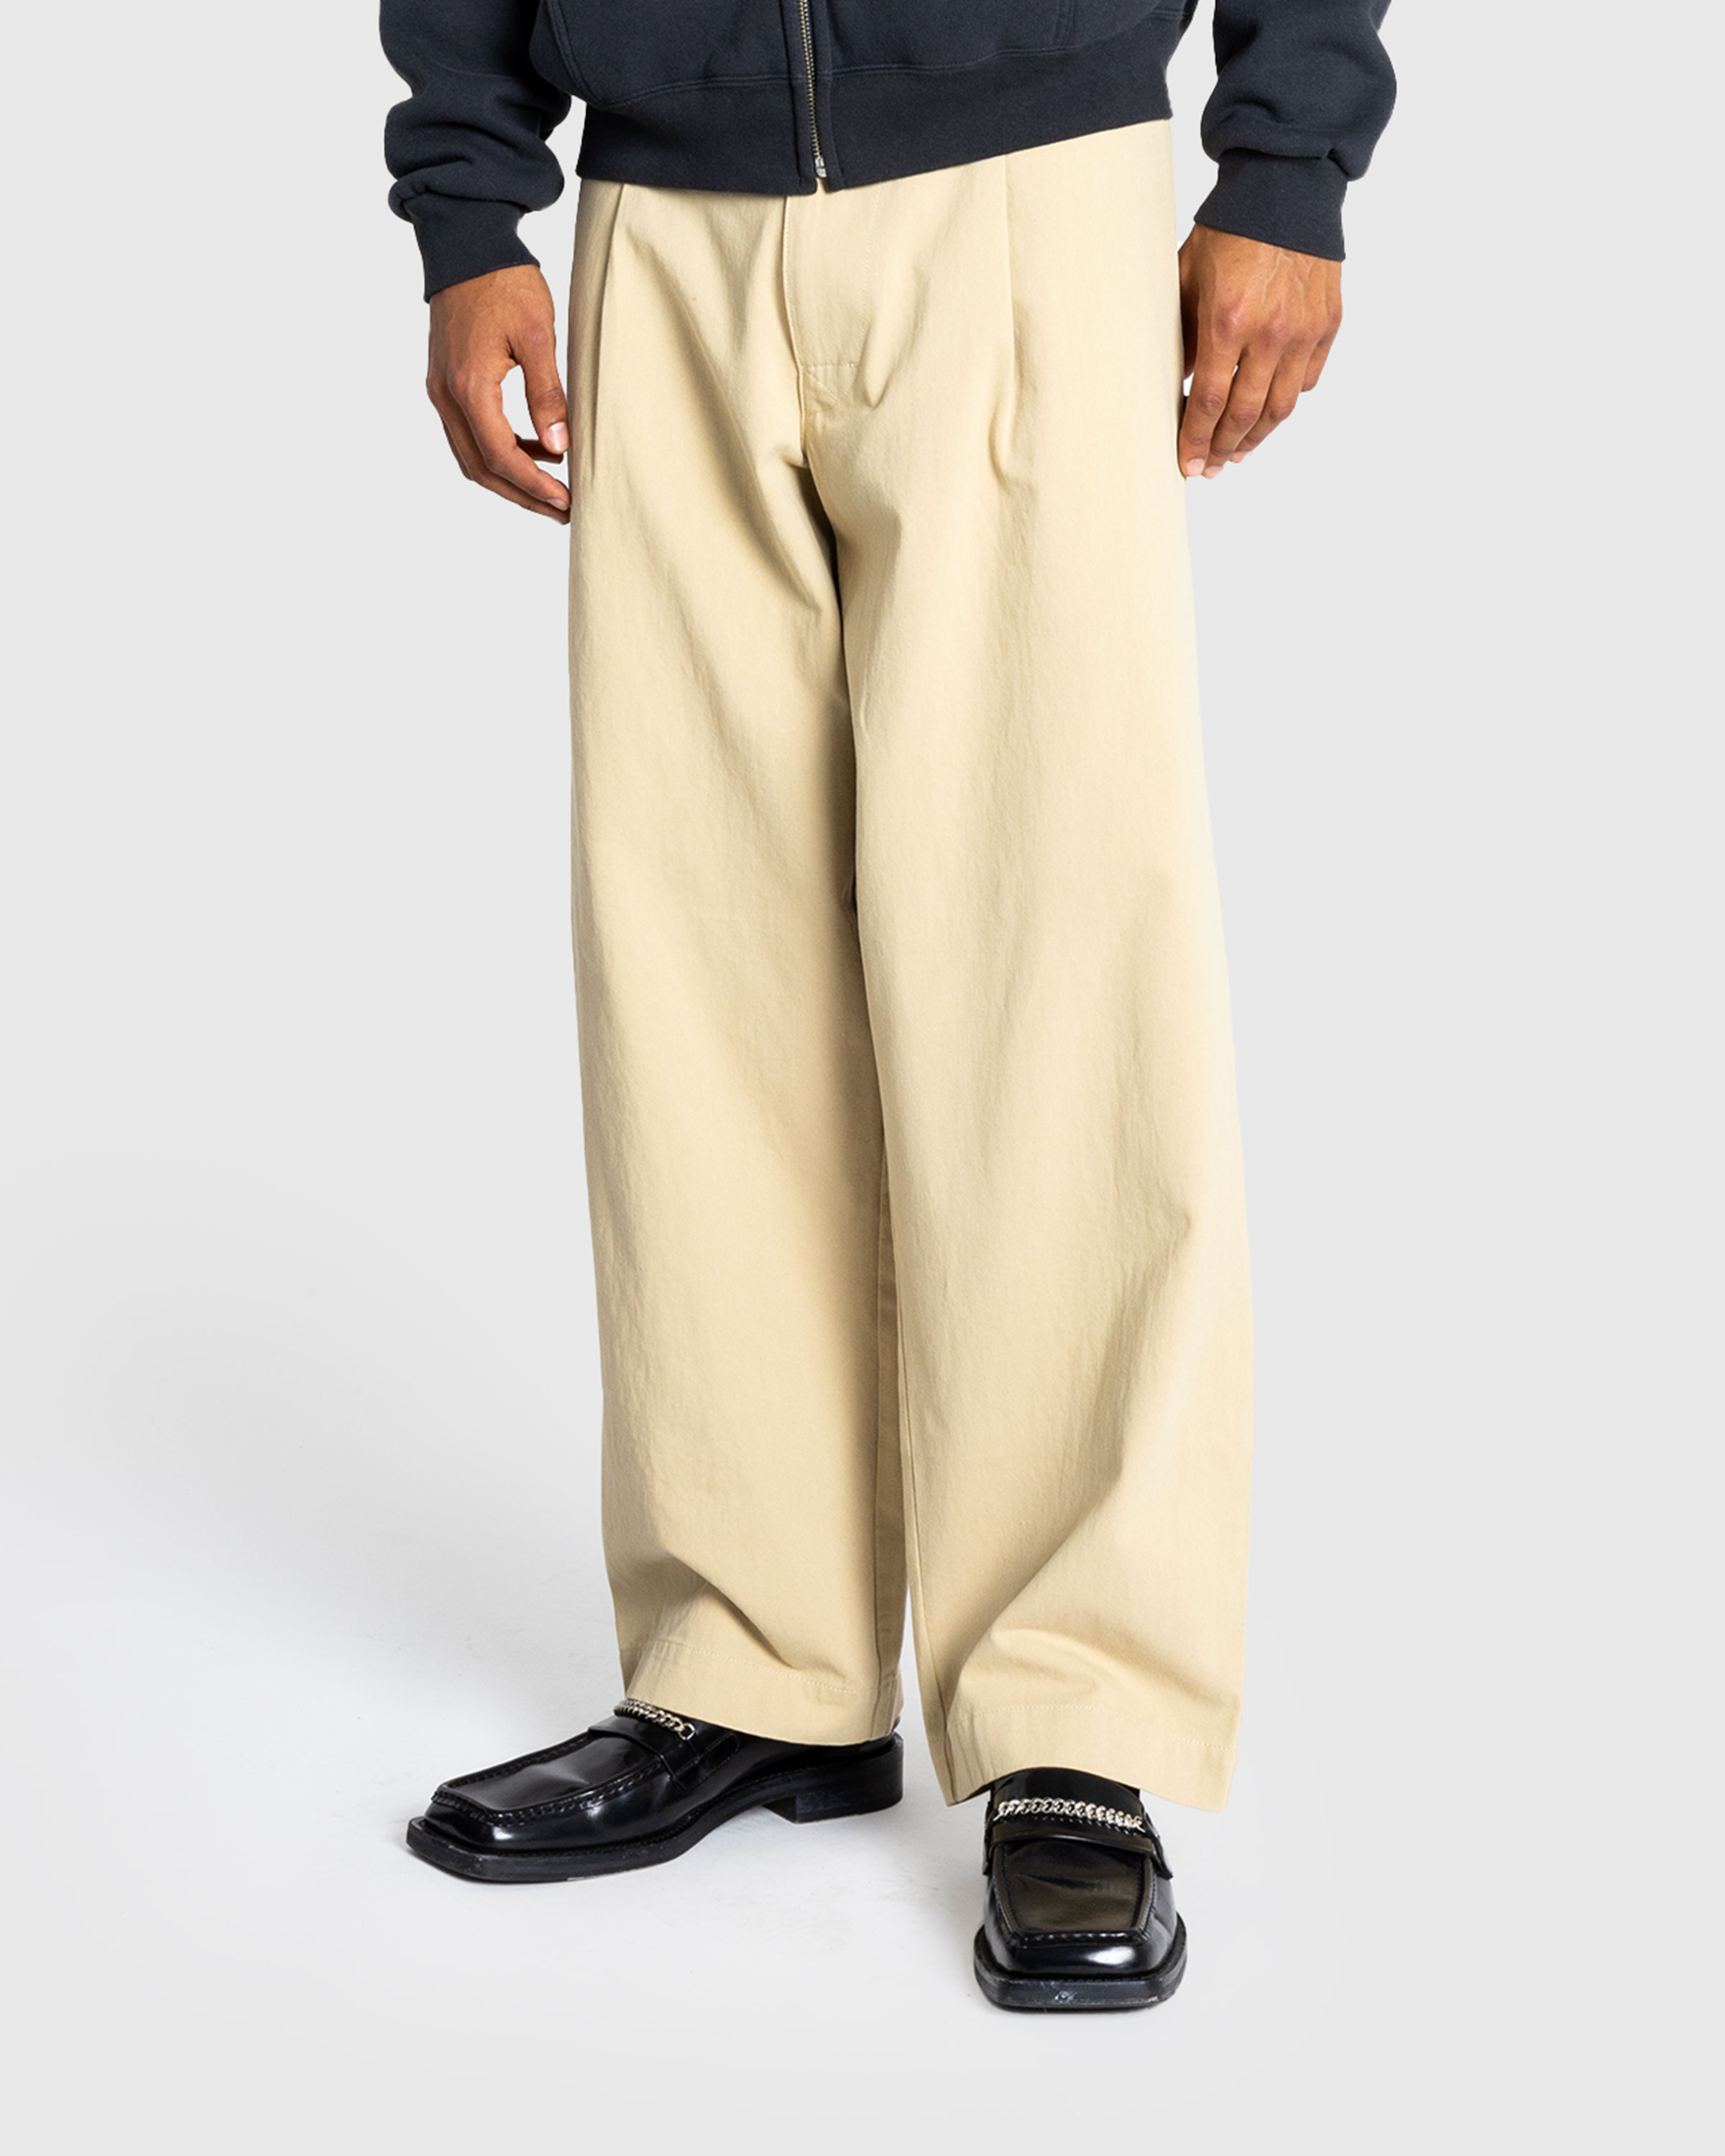 Human Made – Skater Pants Beige - Trousers - Beige - Image 2